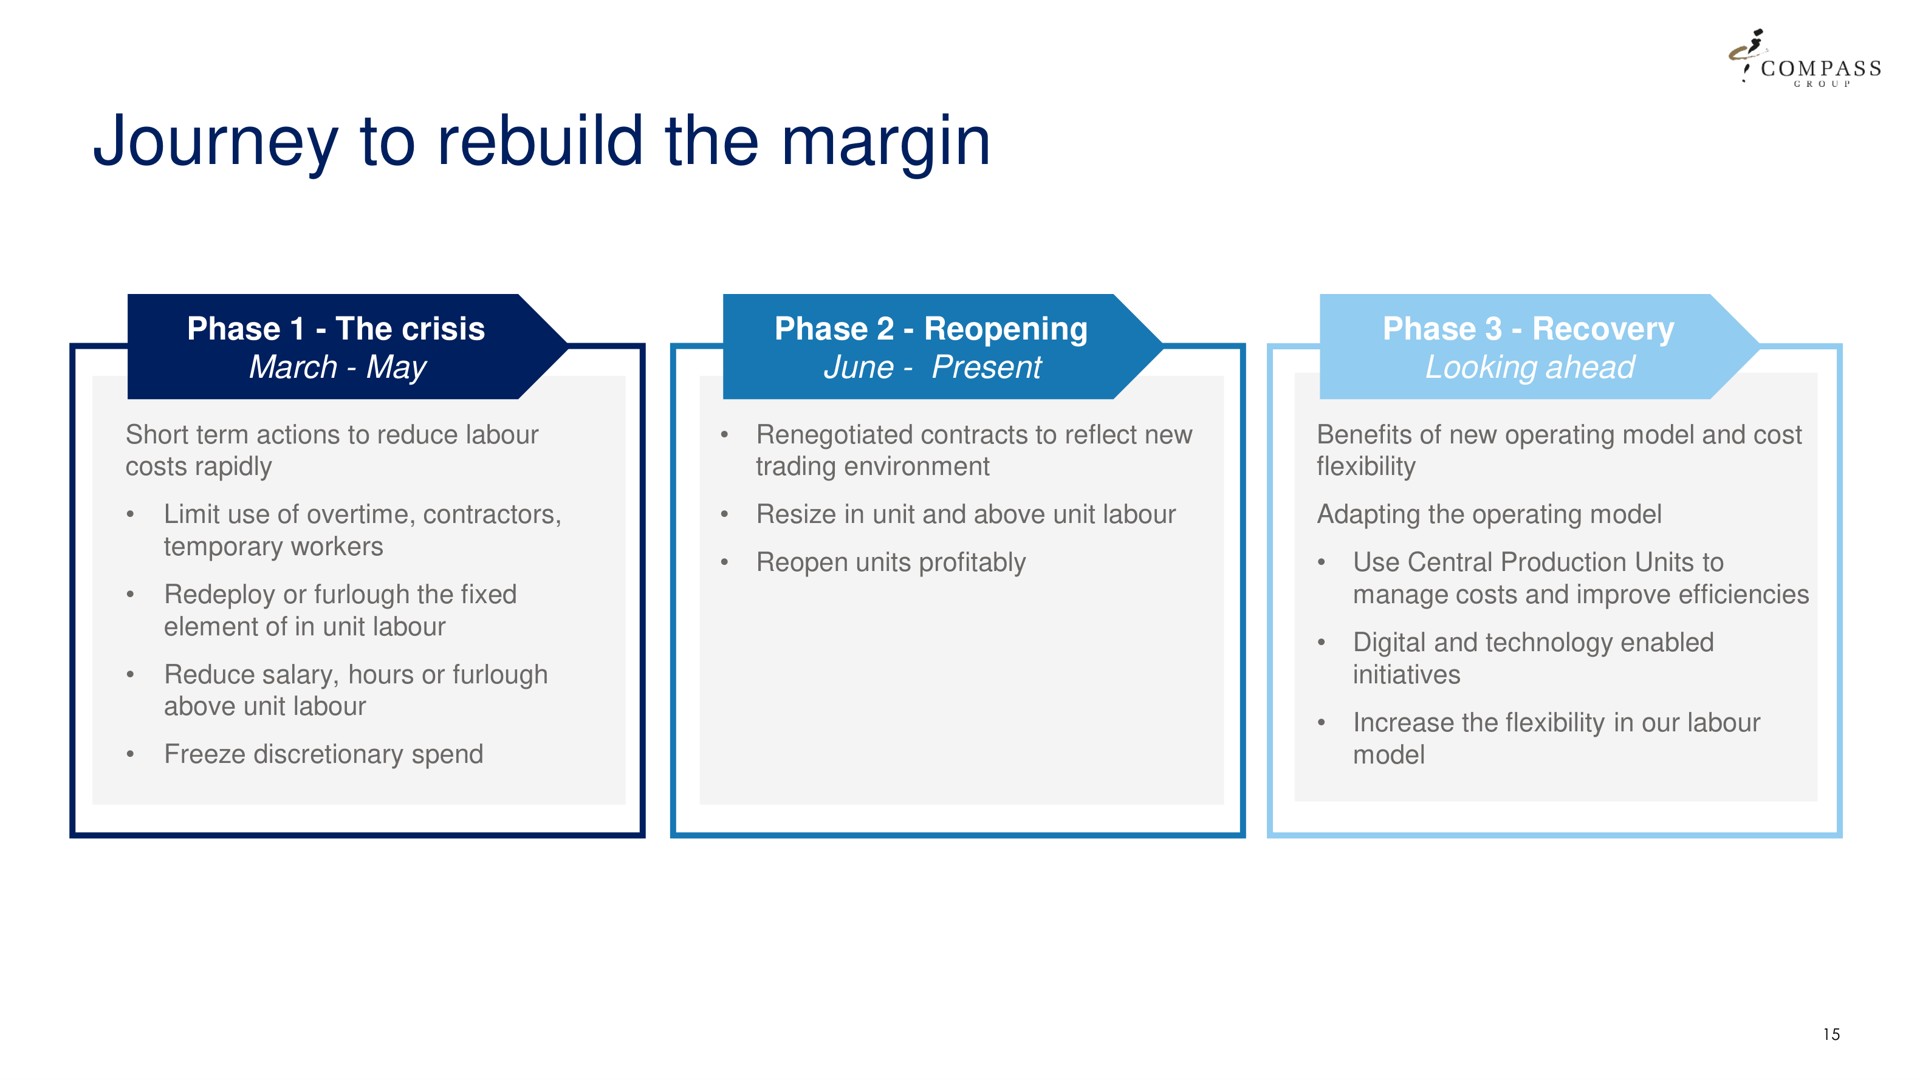 journey to rebuild the margin | Compass Group